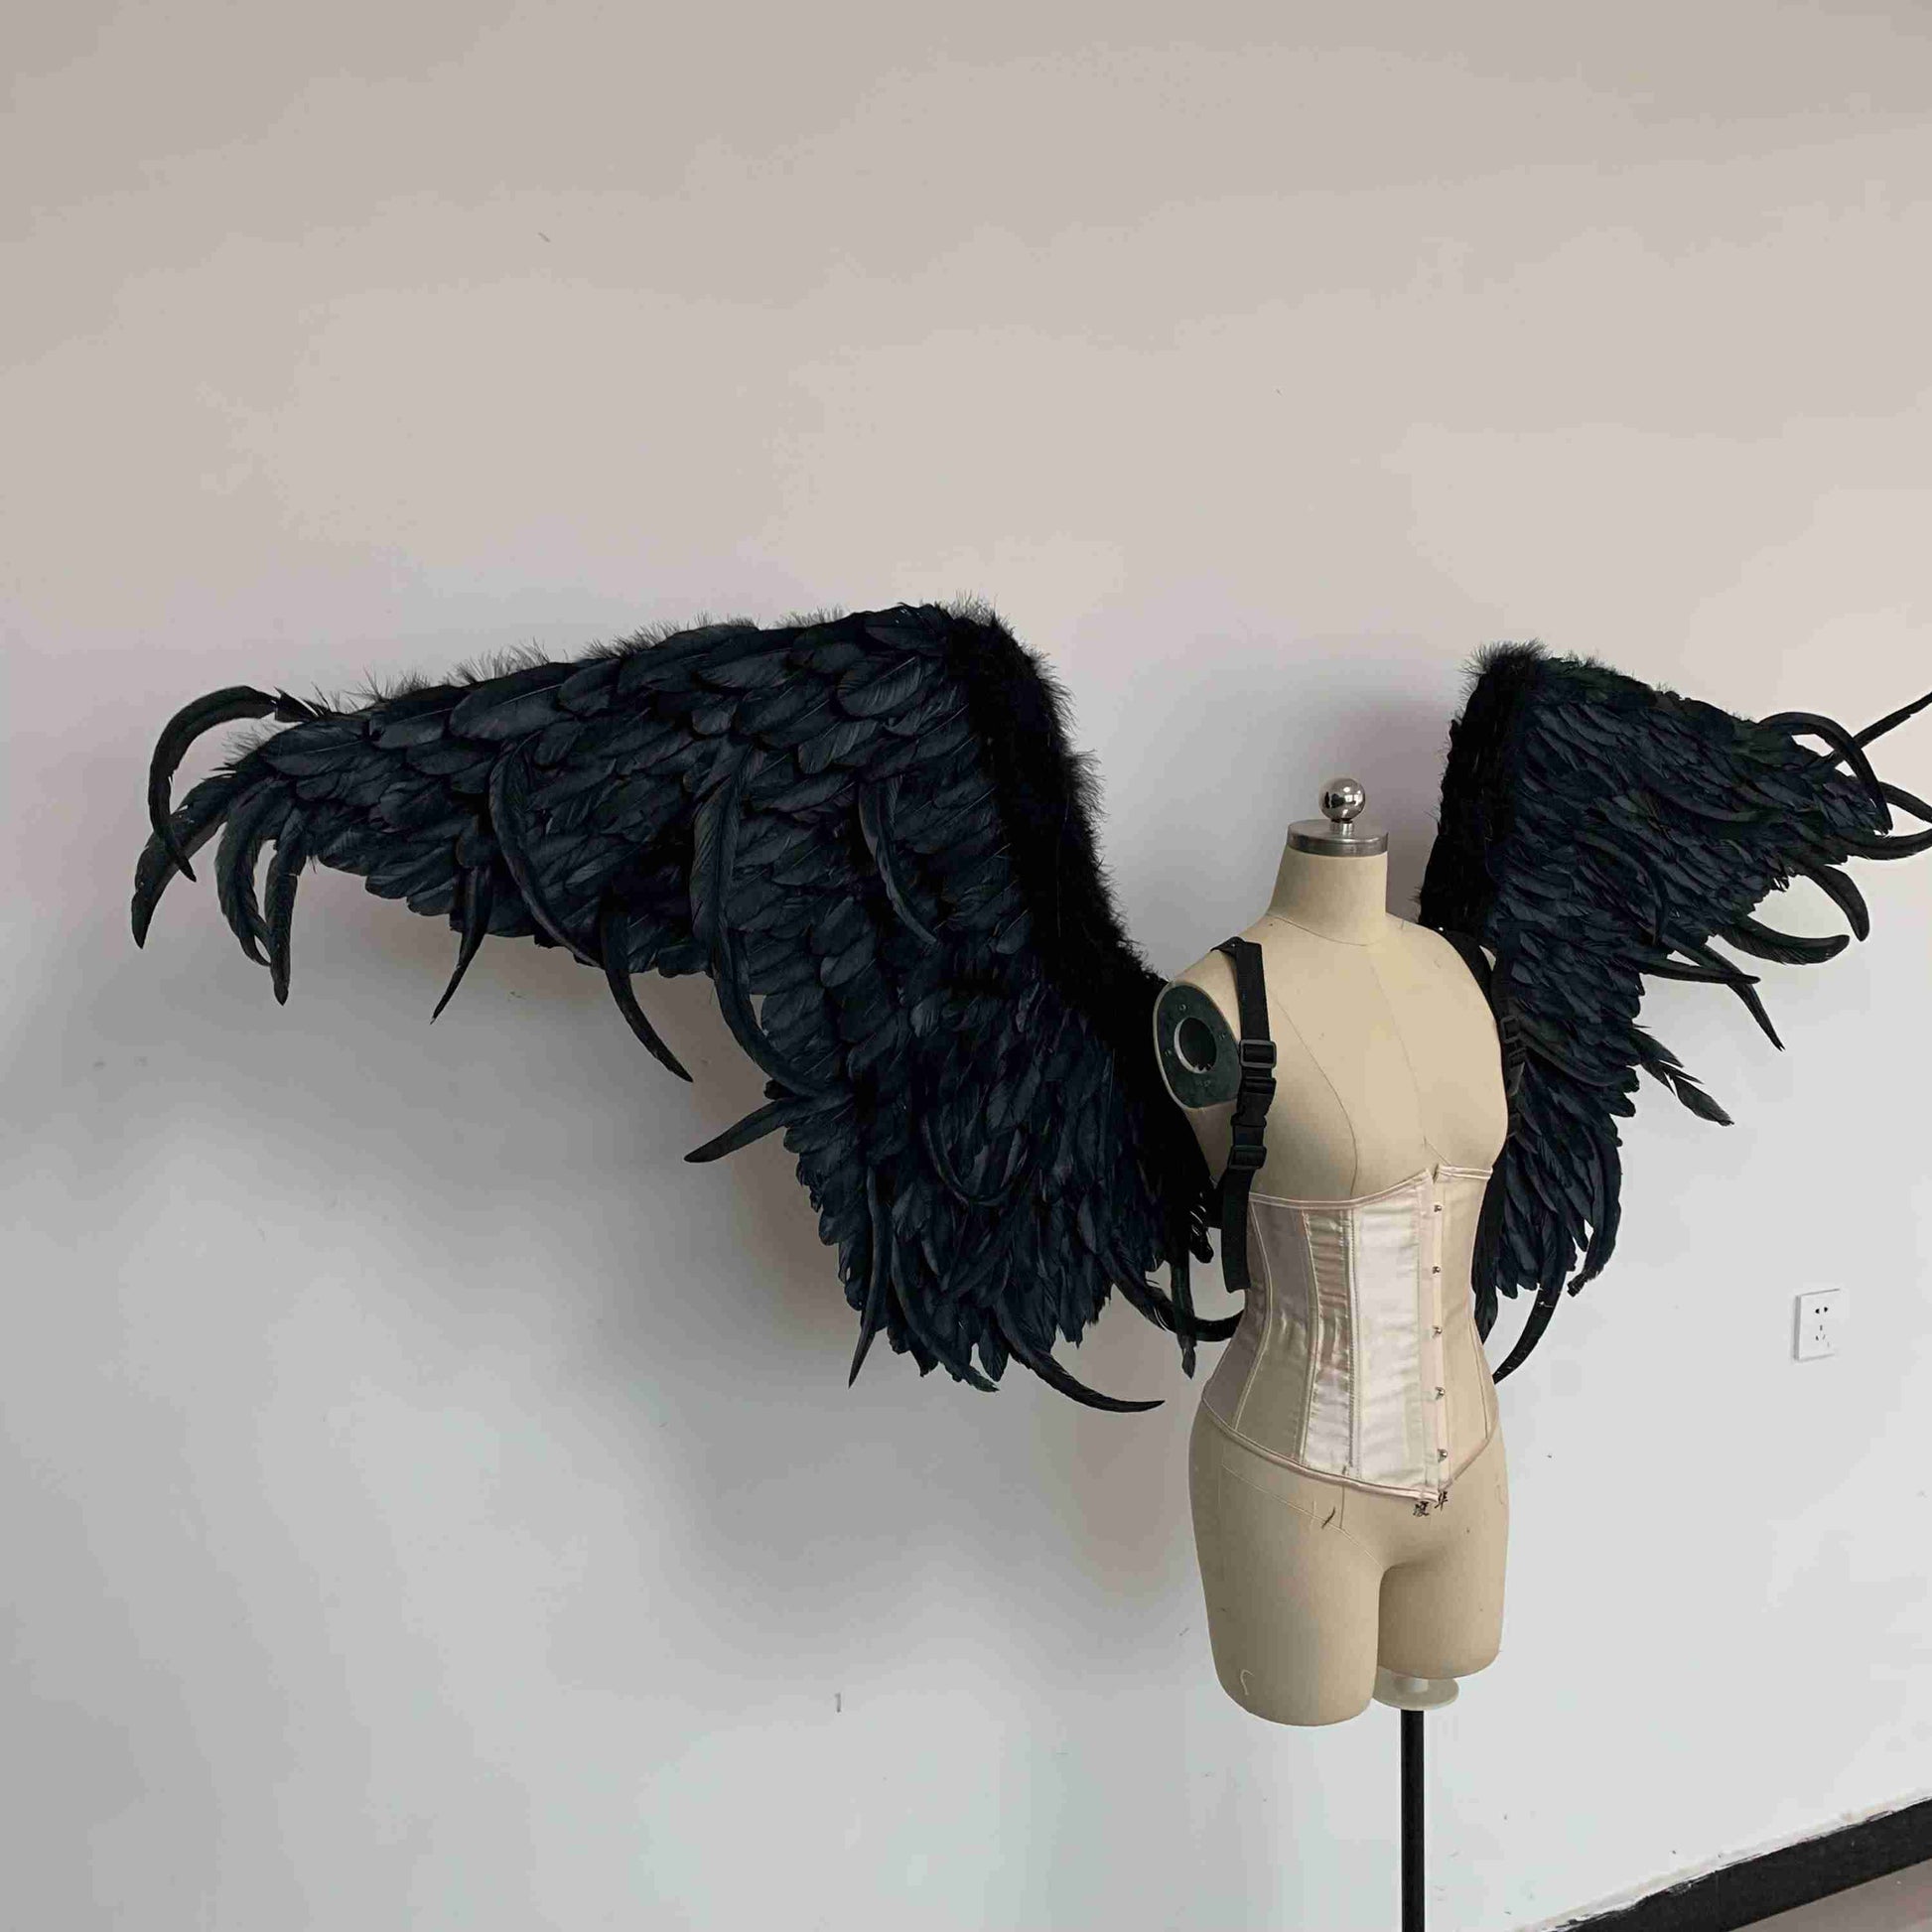 Our black color demon wings from the right side. Made from goose feathers. Wings for angel costume or devil costume. Suitable for photoshoots.